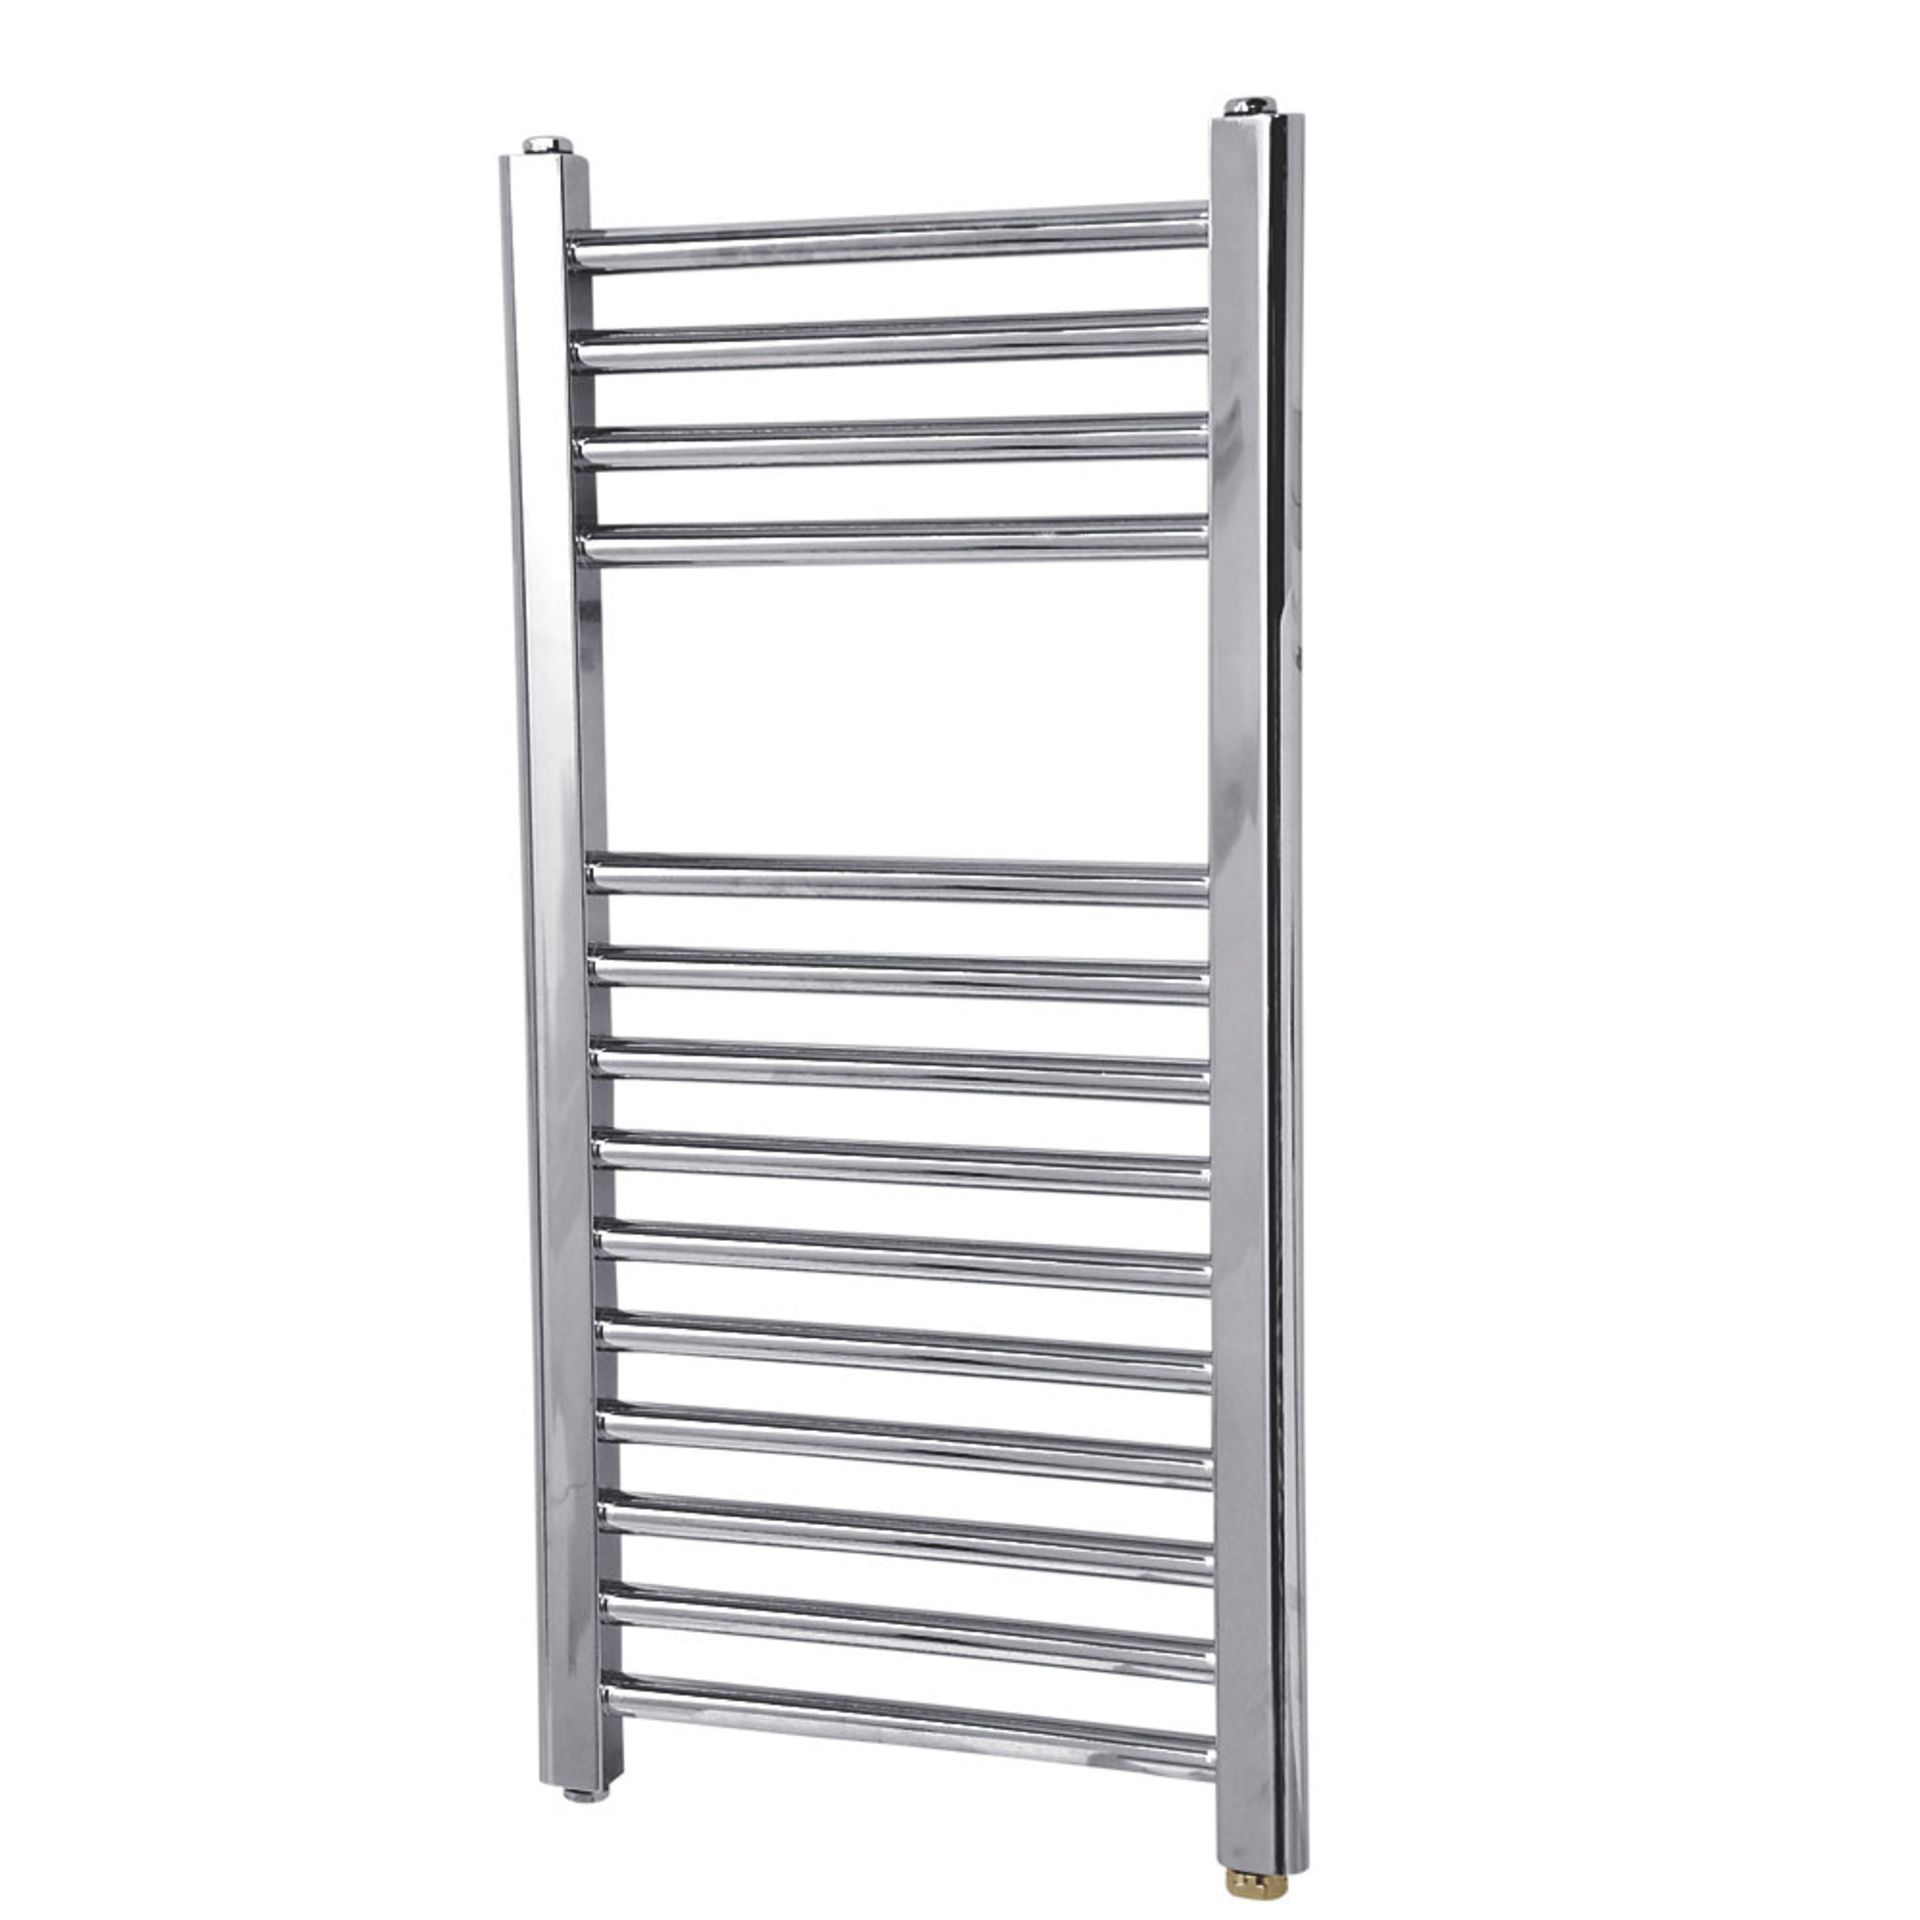 (DD139) 700x400mm FLOMASTA FLAT ELECTRIC TOWEL RADIATOR CHROME. Electrical installation only.... - Image 2 of 2